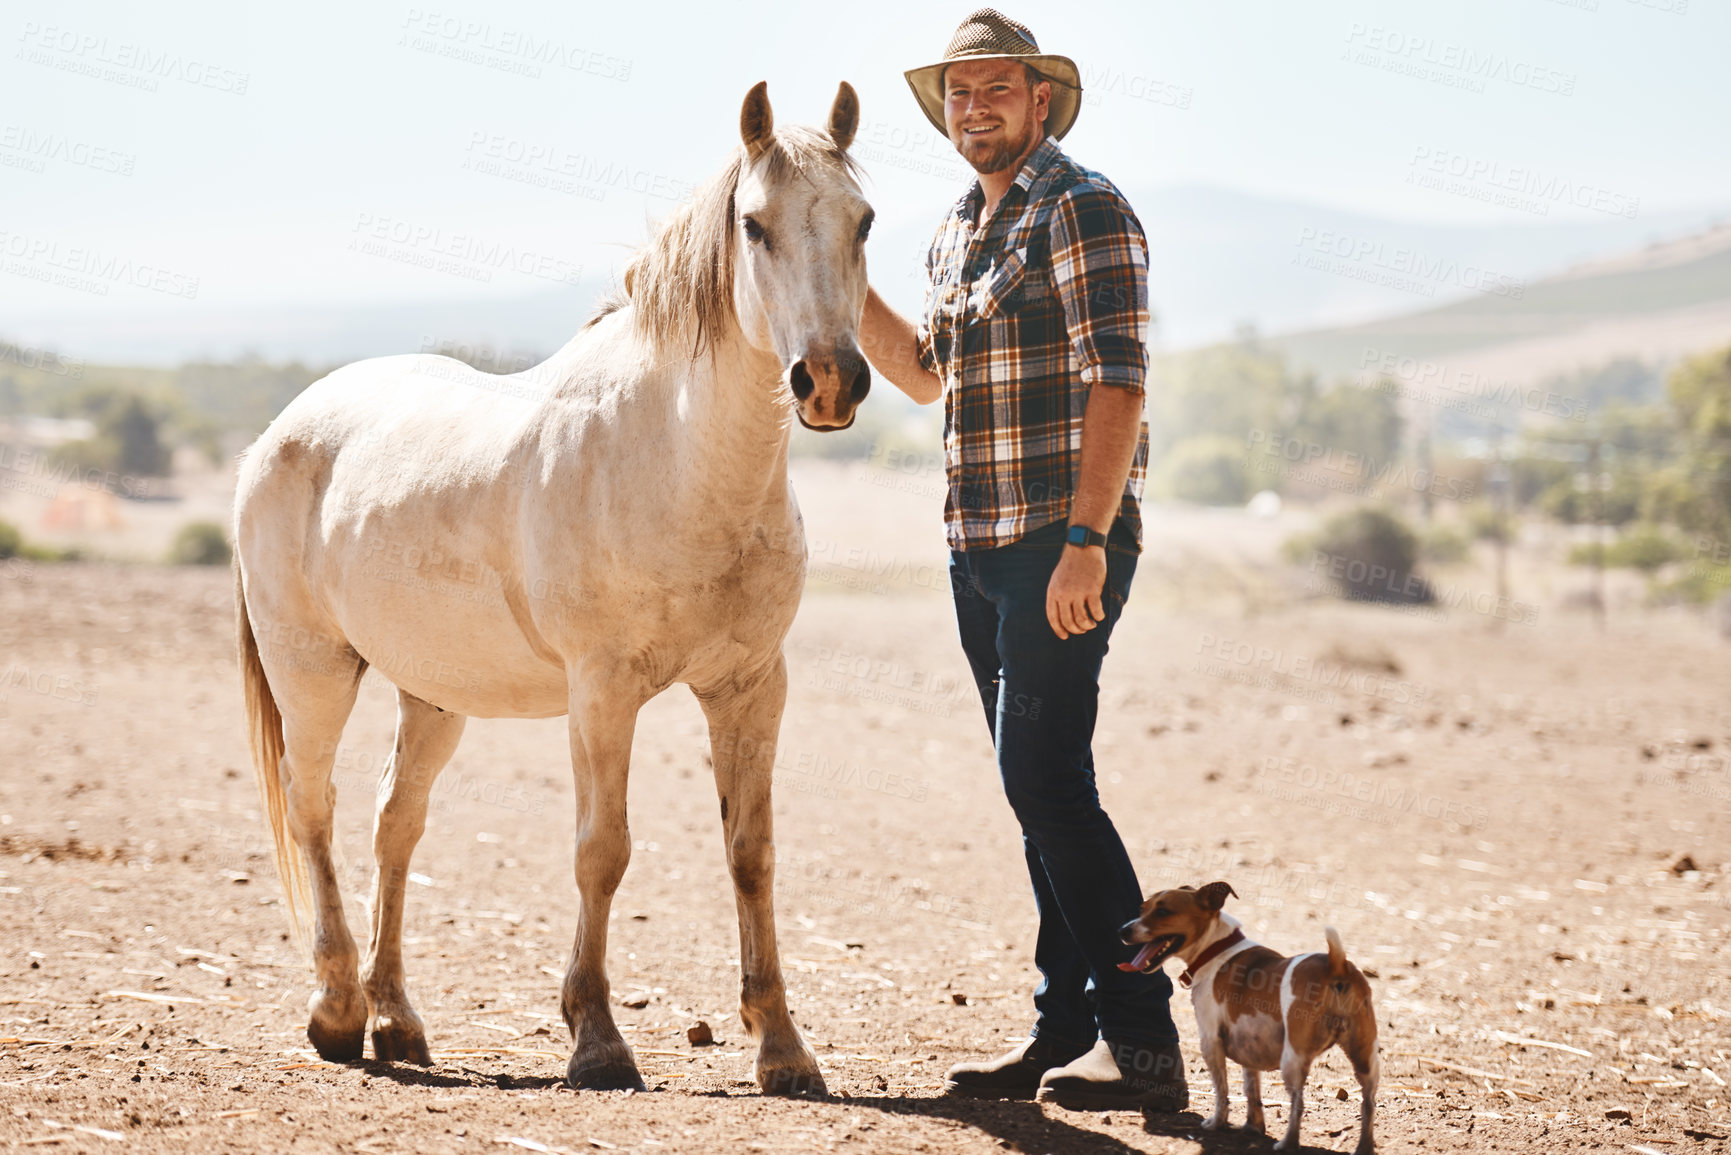 Buy stock photo Portrait of a farmer standing with a horse on a ranch